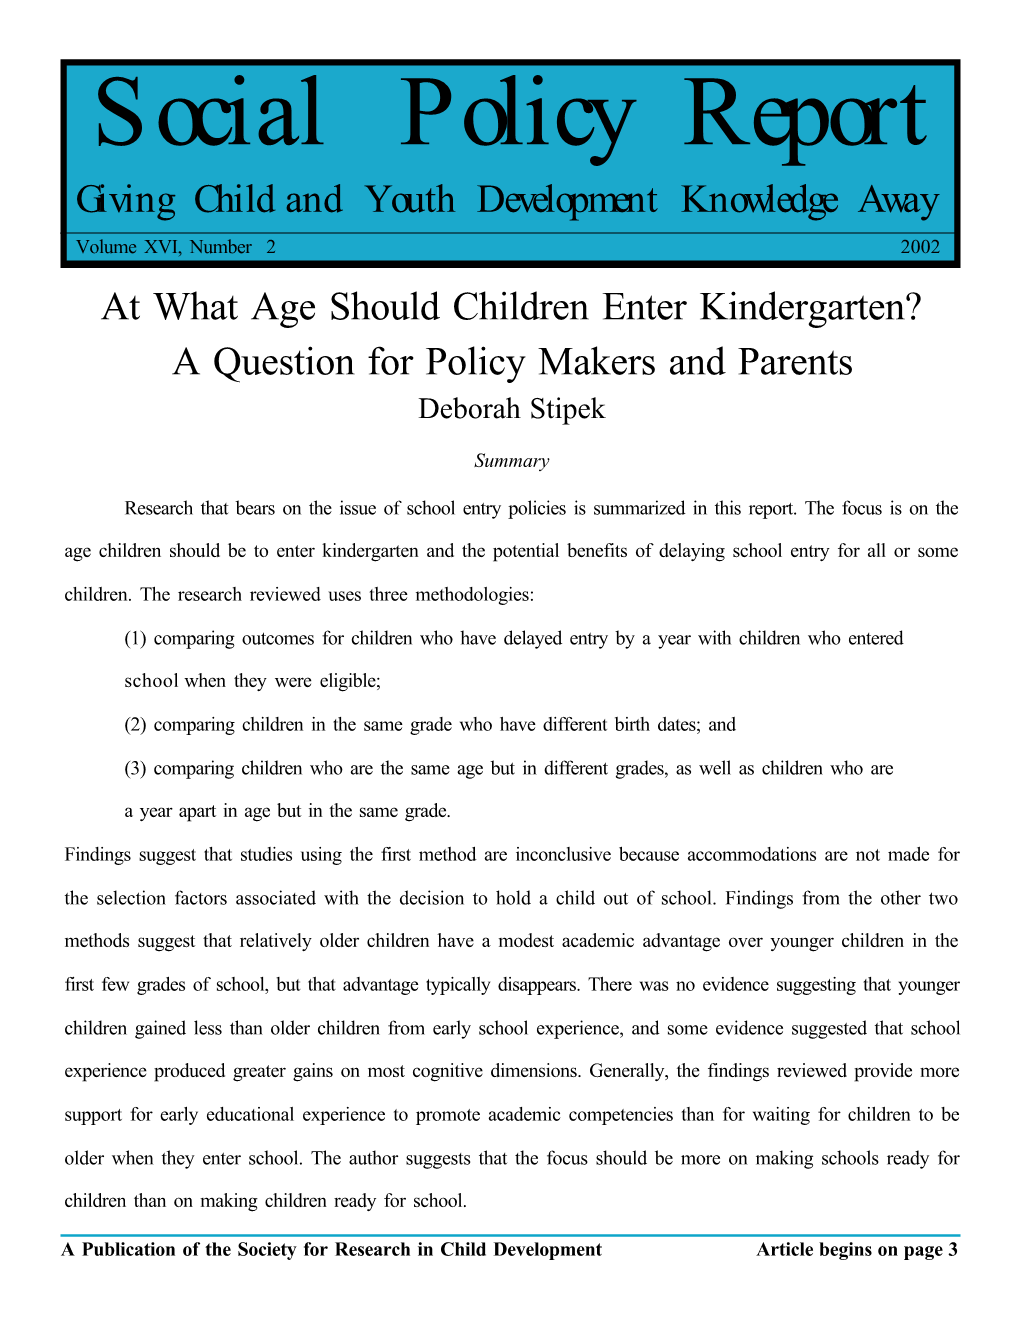 At What Age Should Children Enter Kindergarten? a Question for Policy Makers and Parents Deborah Stipek